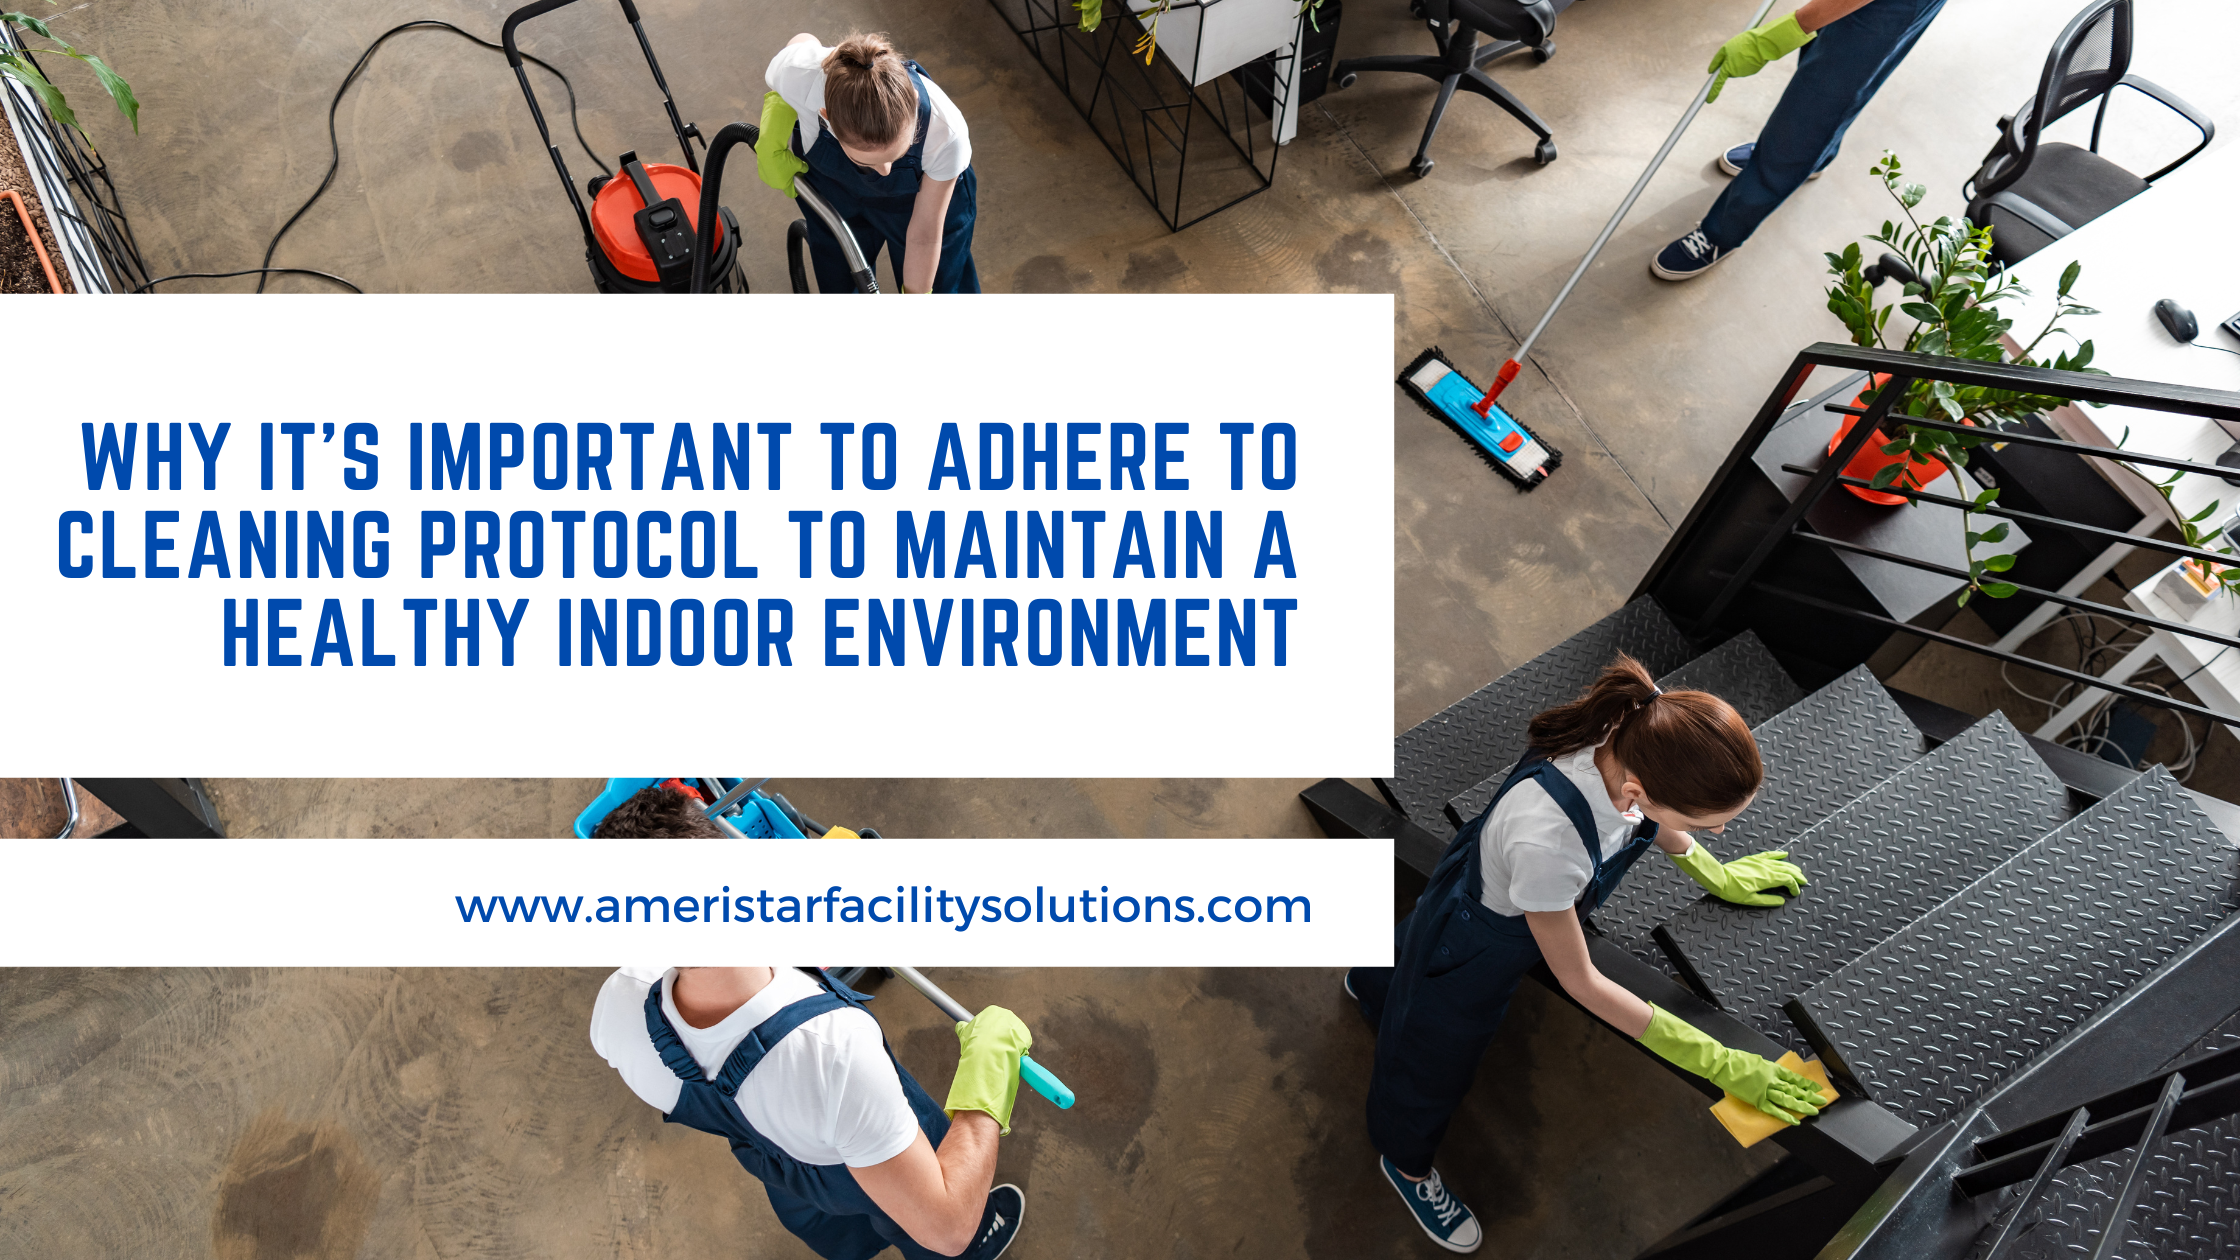 Why It’s Important to Adhere to Cleaning Protocol to Maintain a Healthy Indoor Environment